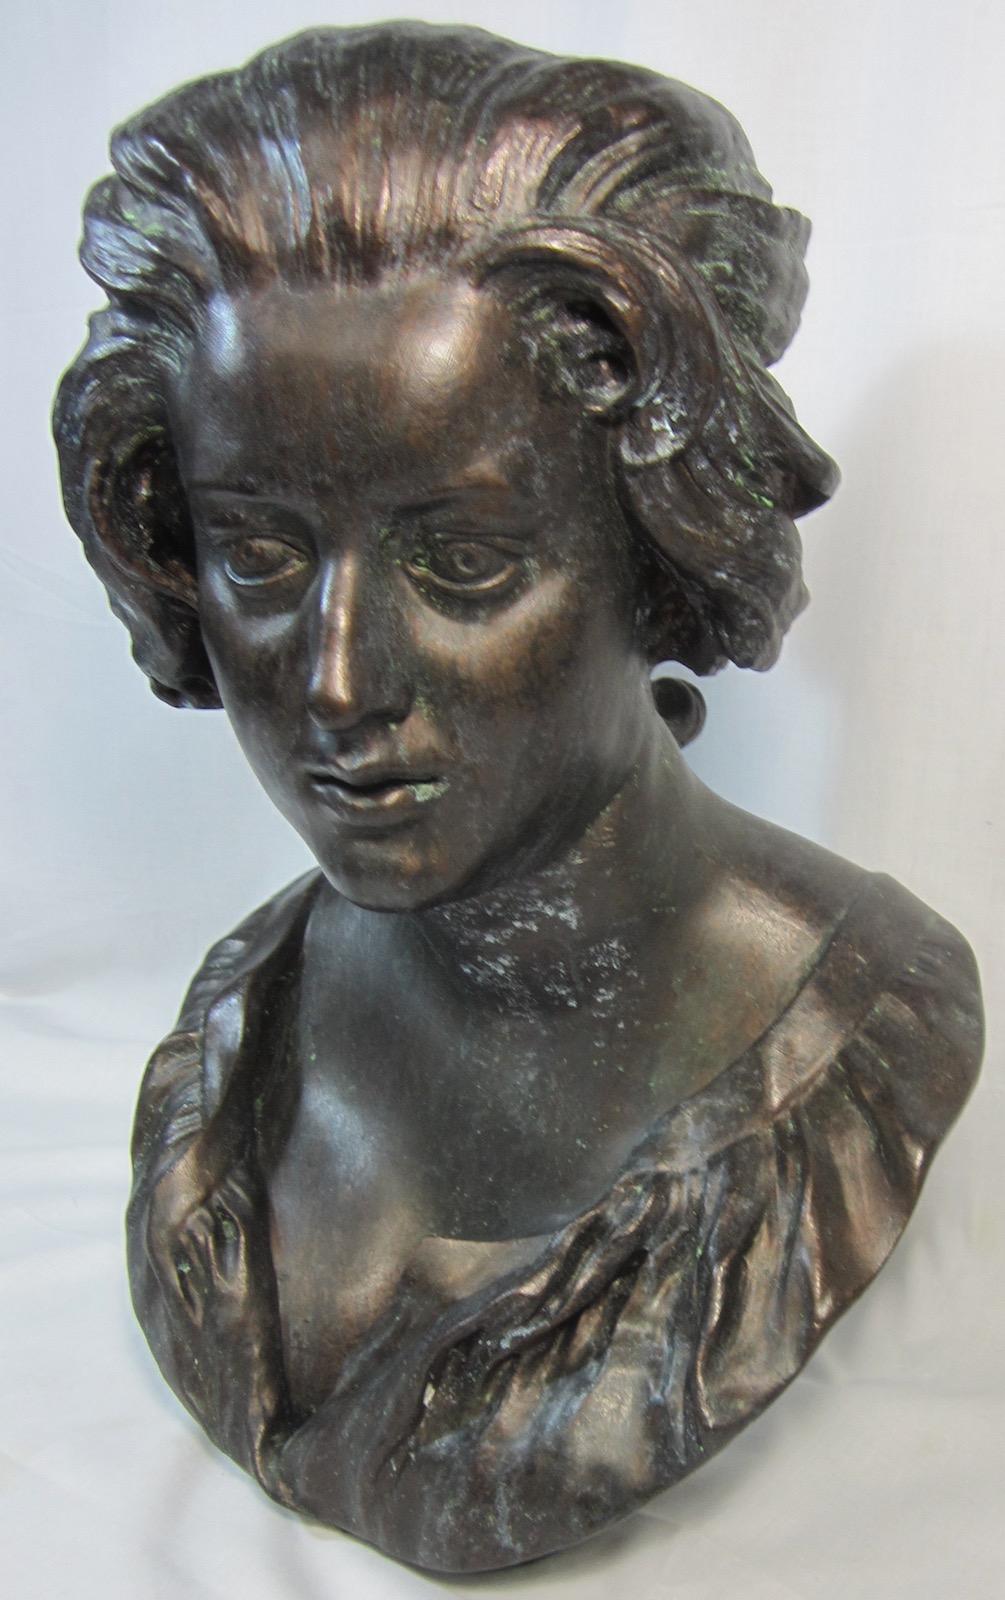 Plaster bust, Costanza after Benini, by Australian Sculptor Nick Leavy with a painted bronze finish.
The original bust of Costanza Bonarelli is a marble portrait sculpture by the Italian artist Gian Lorenzo Bernini, created in the 1630s.
It is